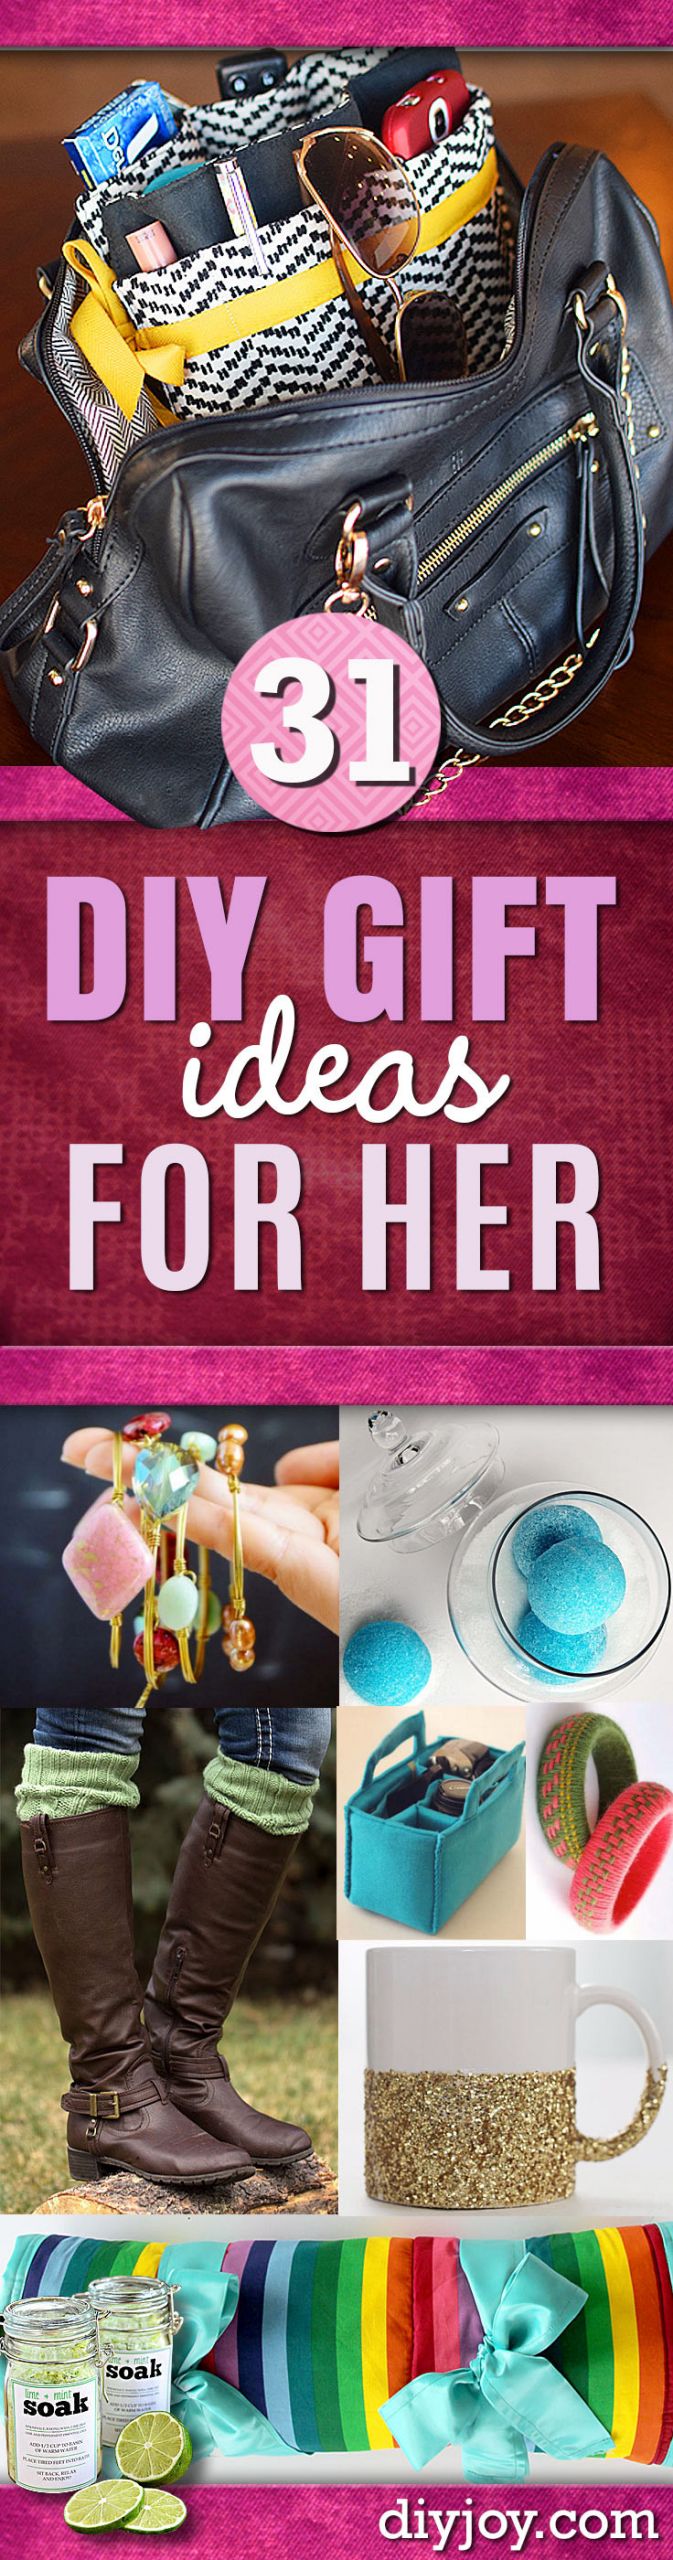 Xmas Gift Ideas For Girlfriend
 DIY Gift Ideas for Her